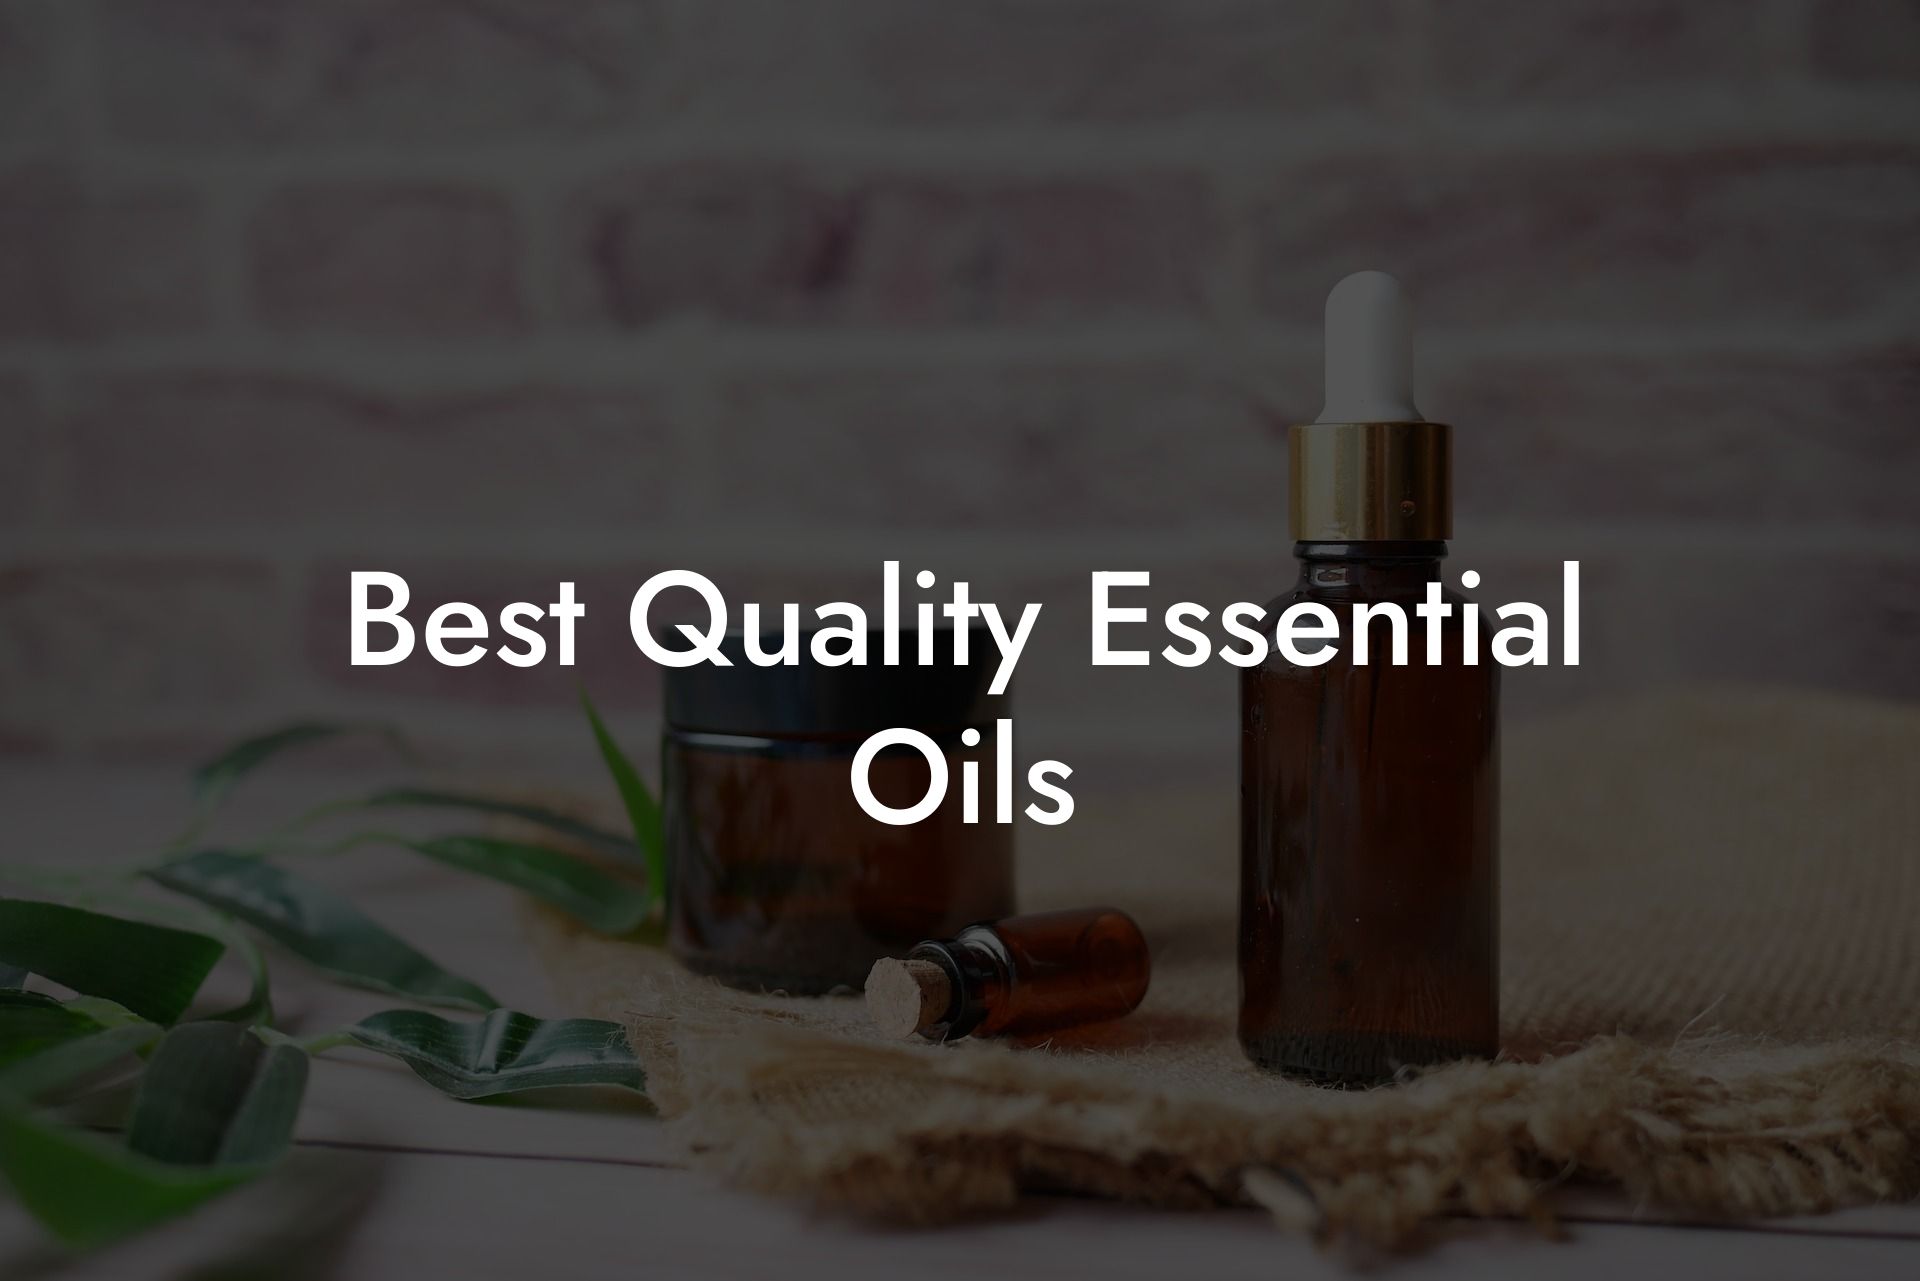 Best Quality Essential Oils